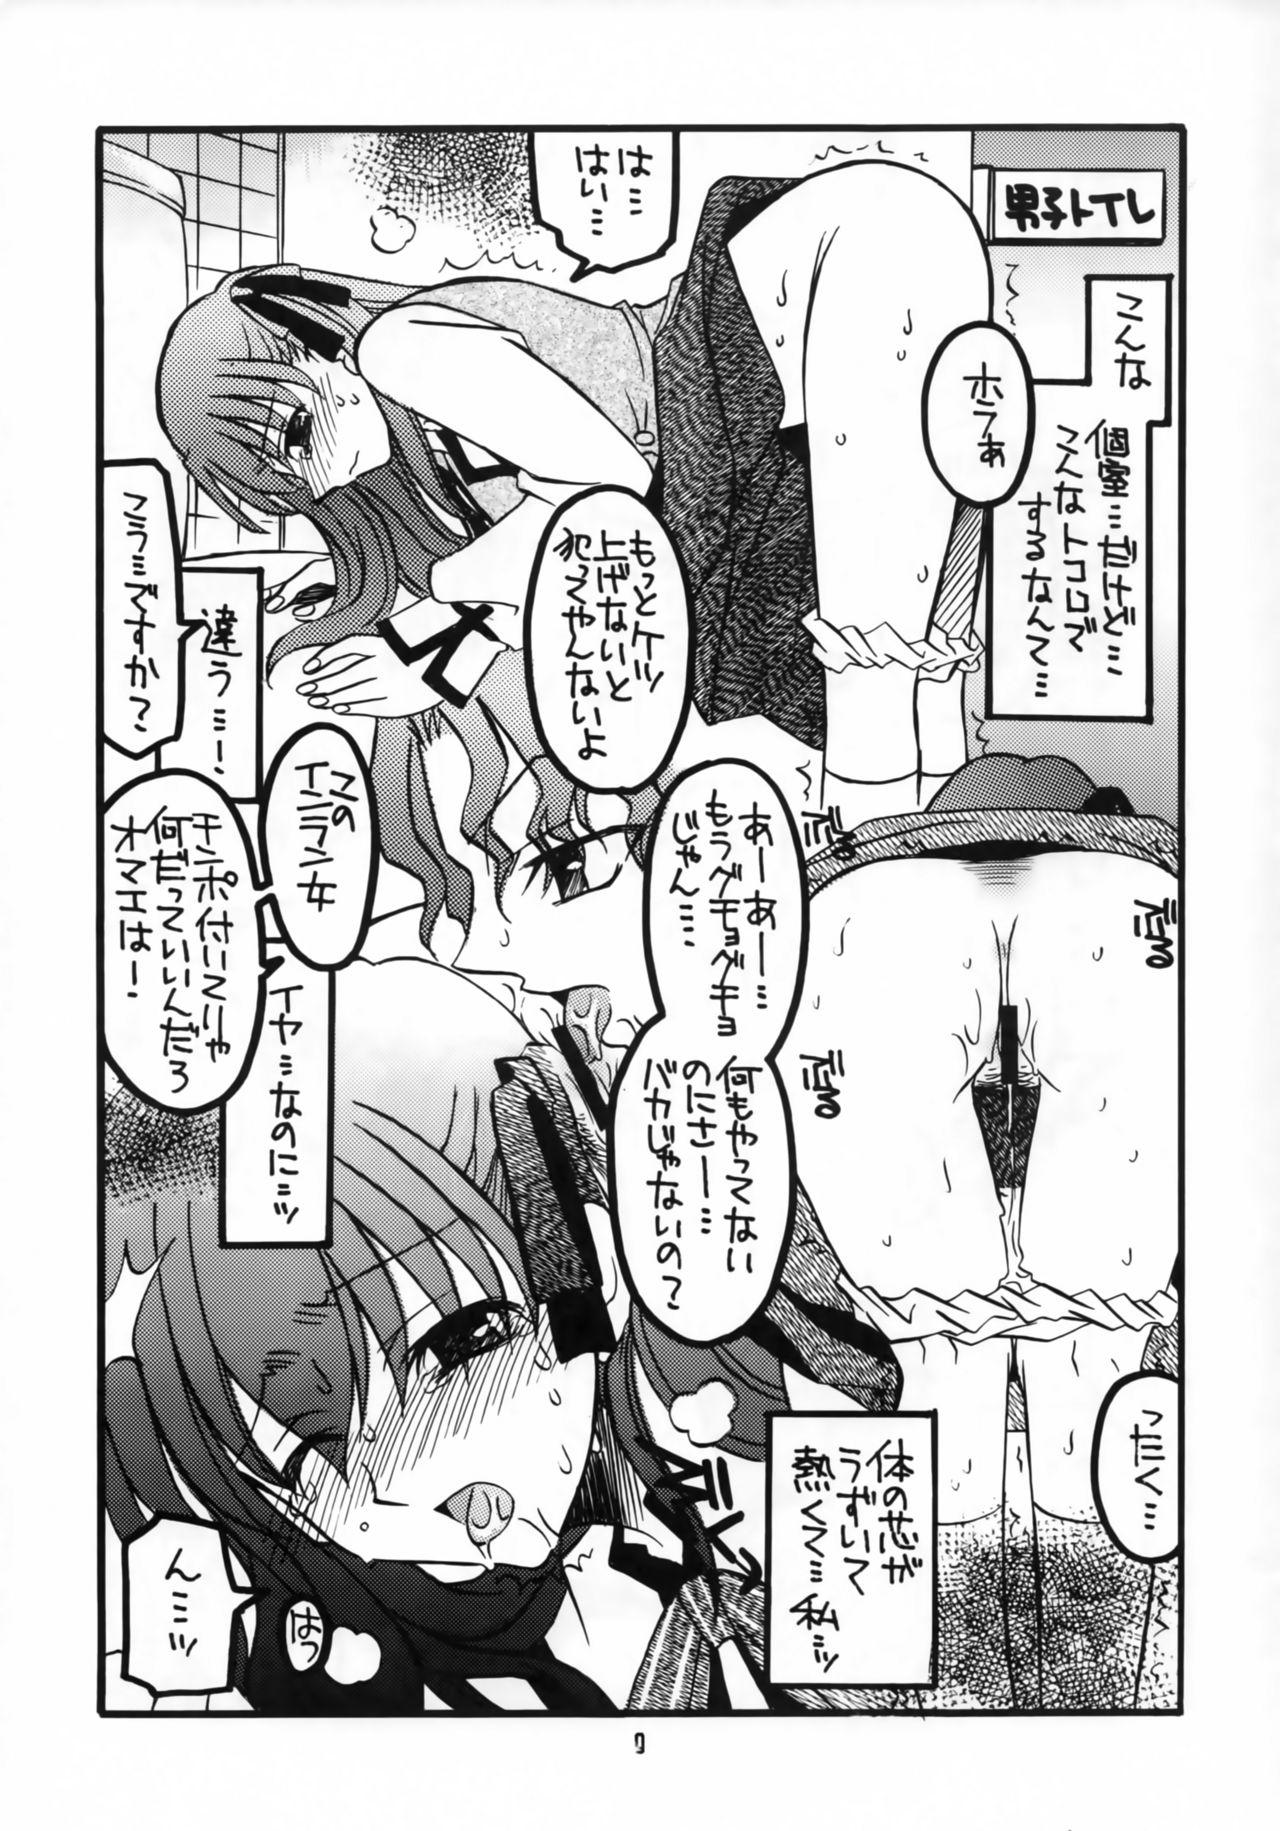 Submissive (C66) [Squall (Takano Ukou)] Sakura-chan to Rider-san Chotto Erogimi Hon (Fate/stay night) - Fate stay night Shaved Pussy - Page 8